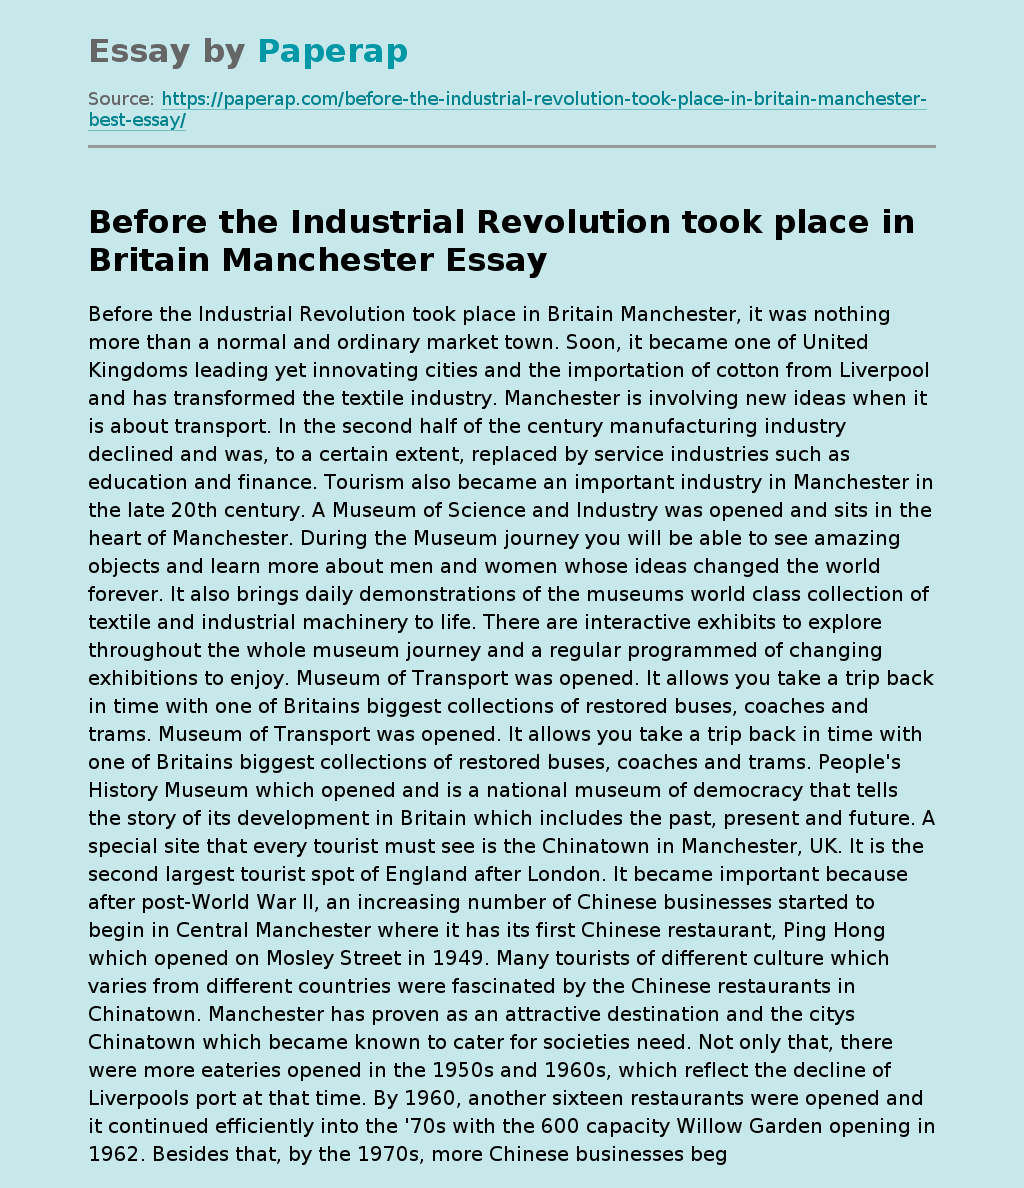 Before the Industrial Revolution took place in Britain Manchester